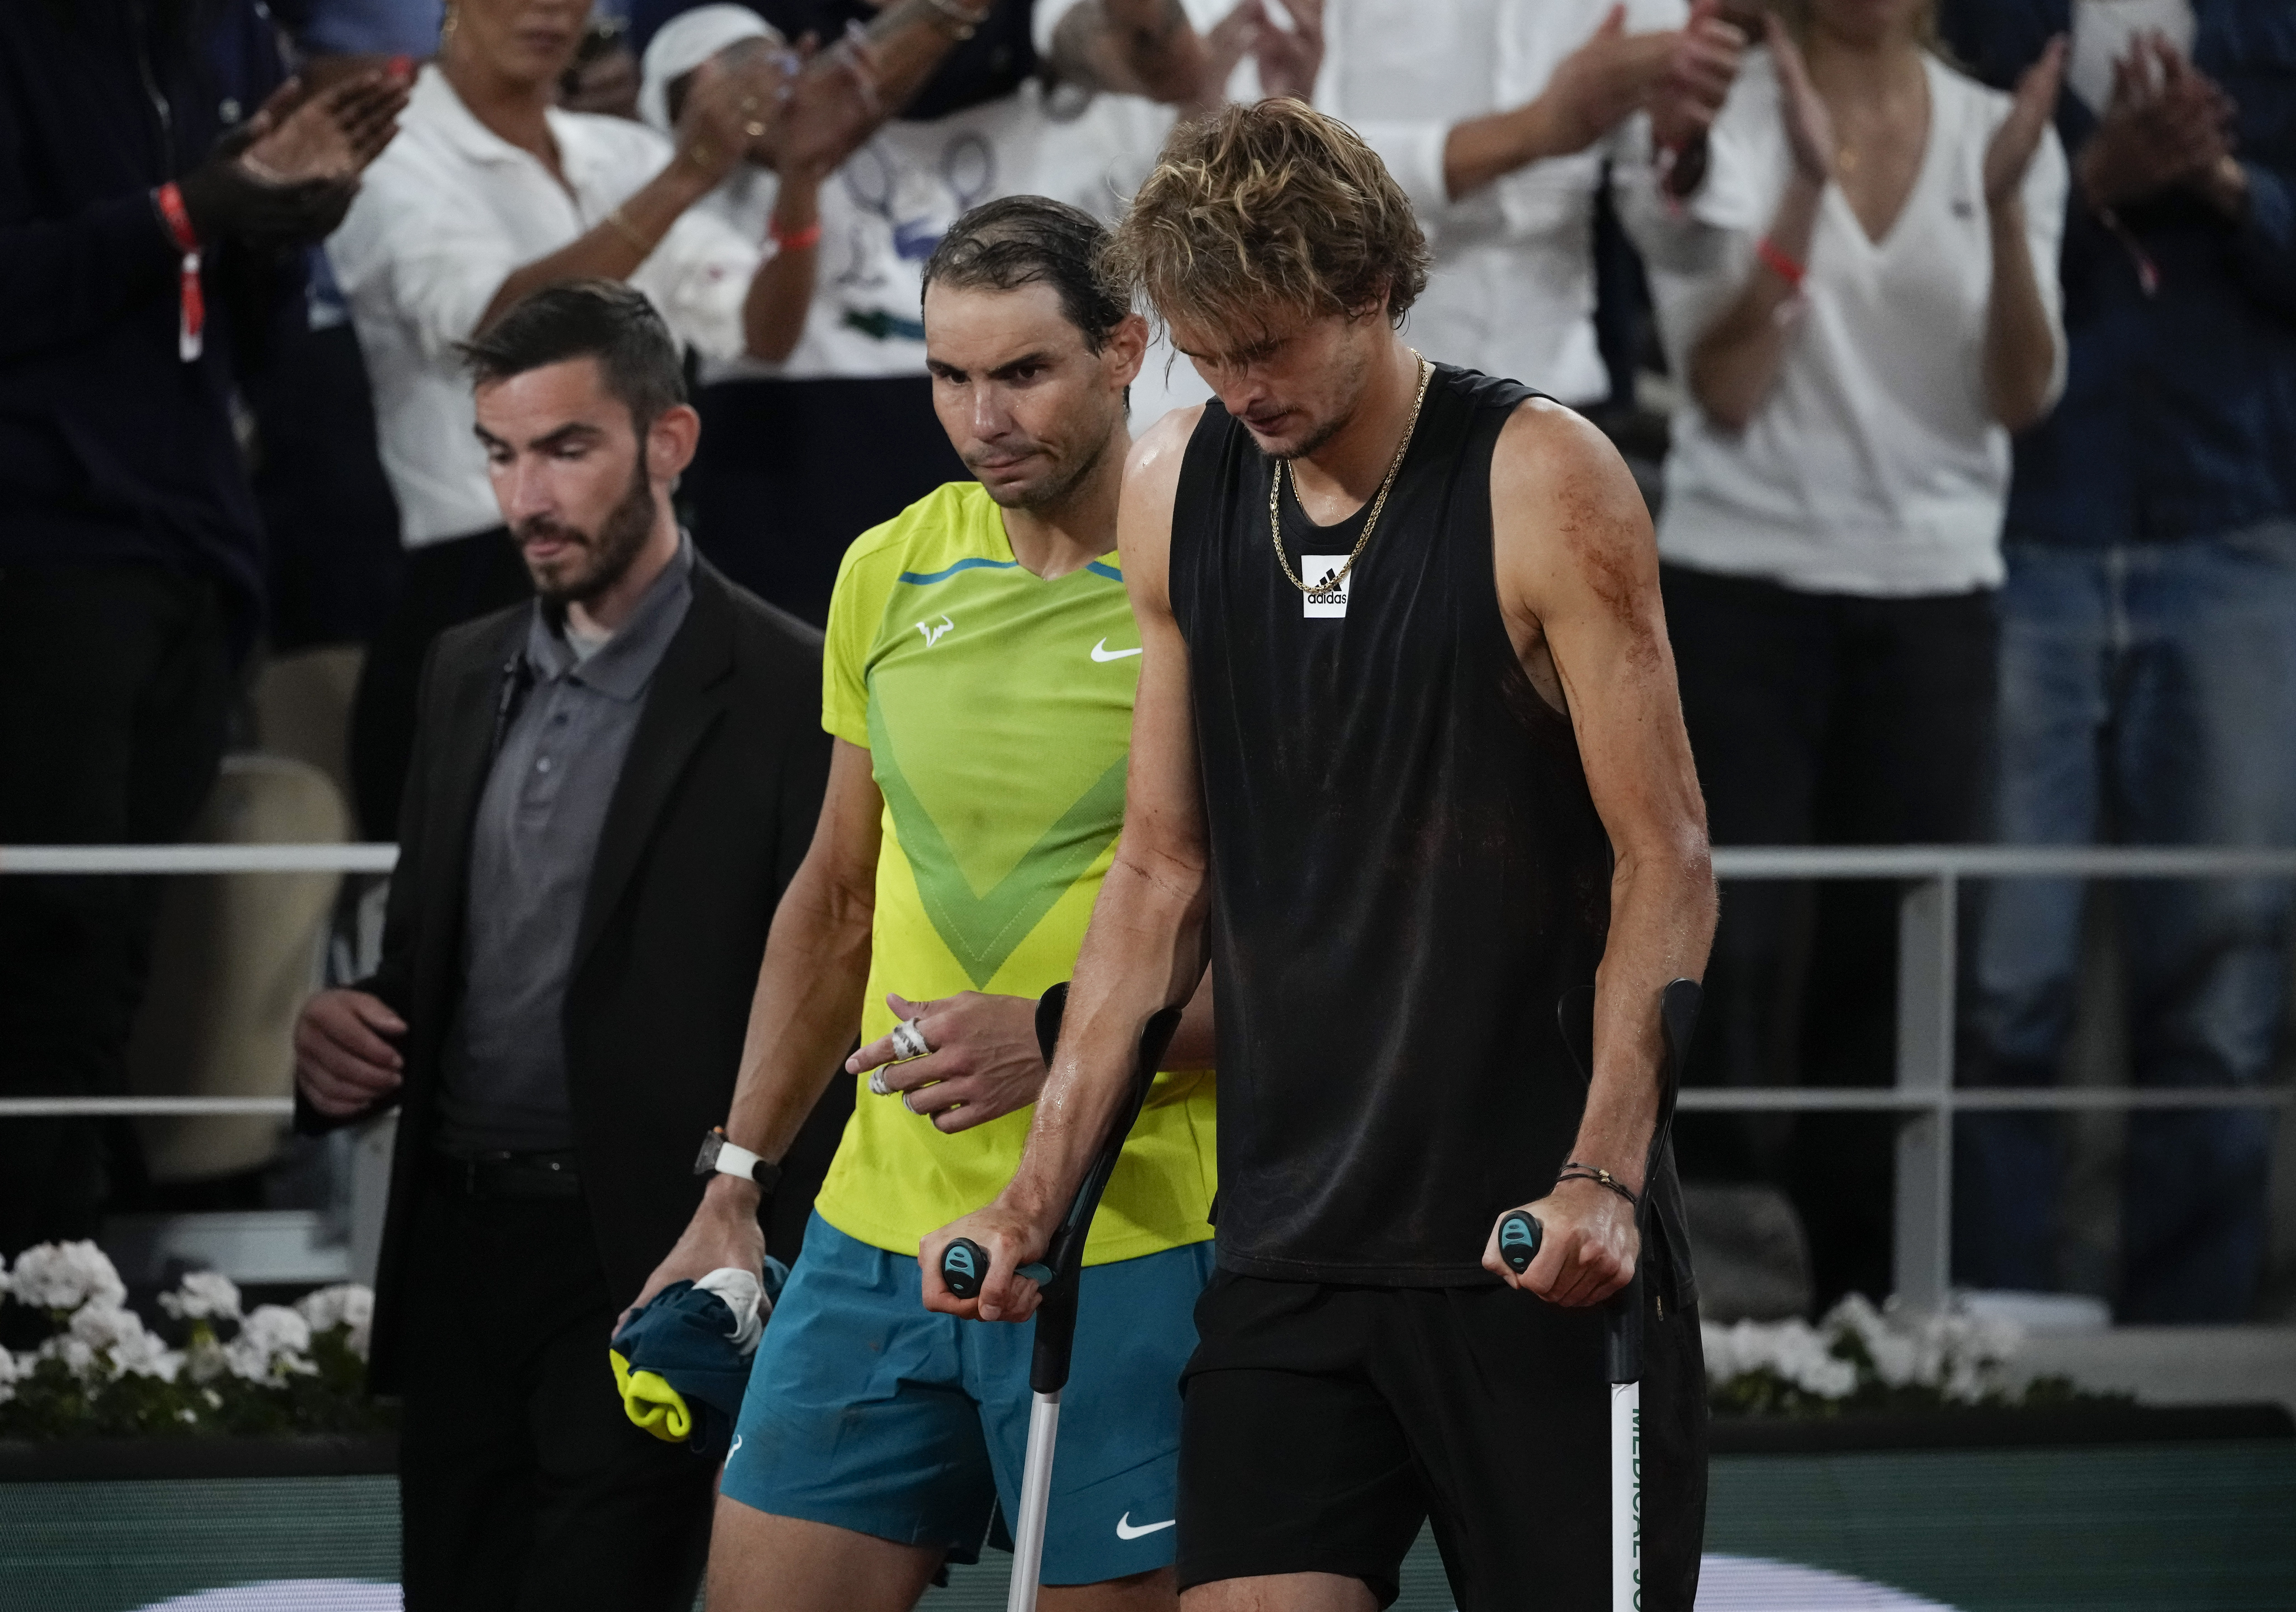 Nadal to French Open final after Zverev injury; Ruud next